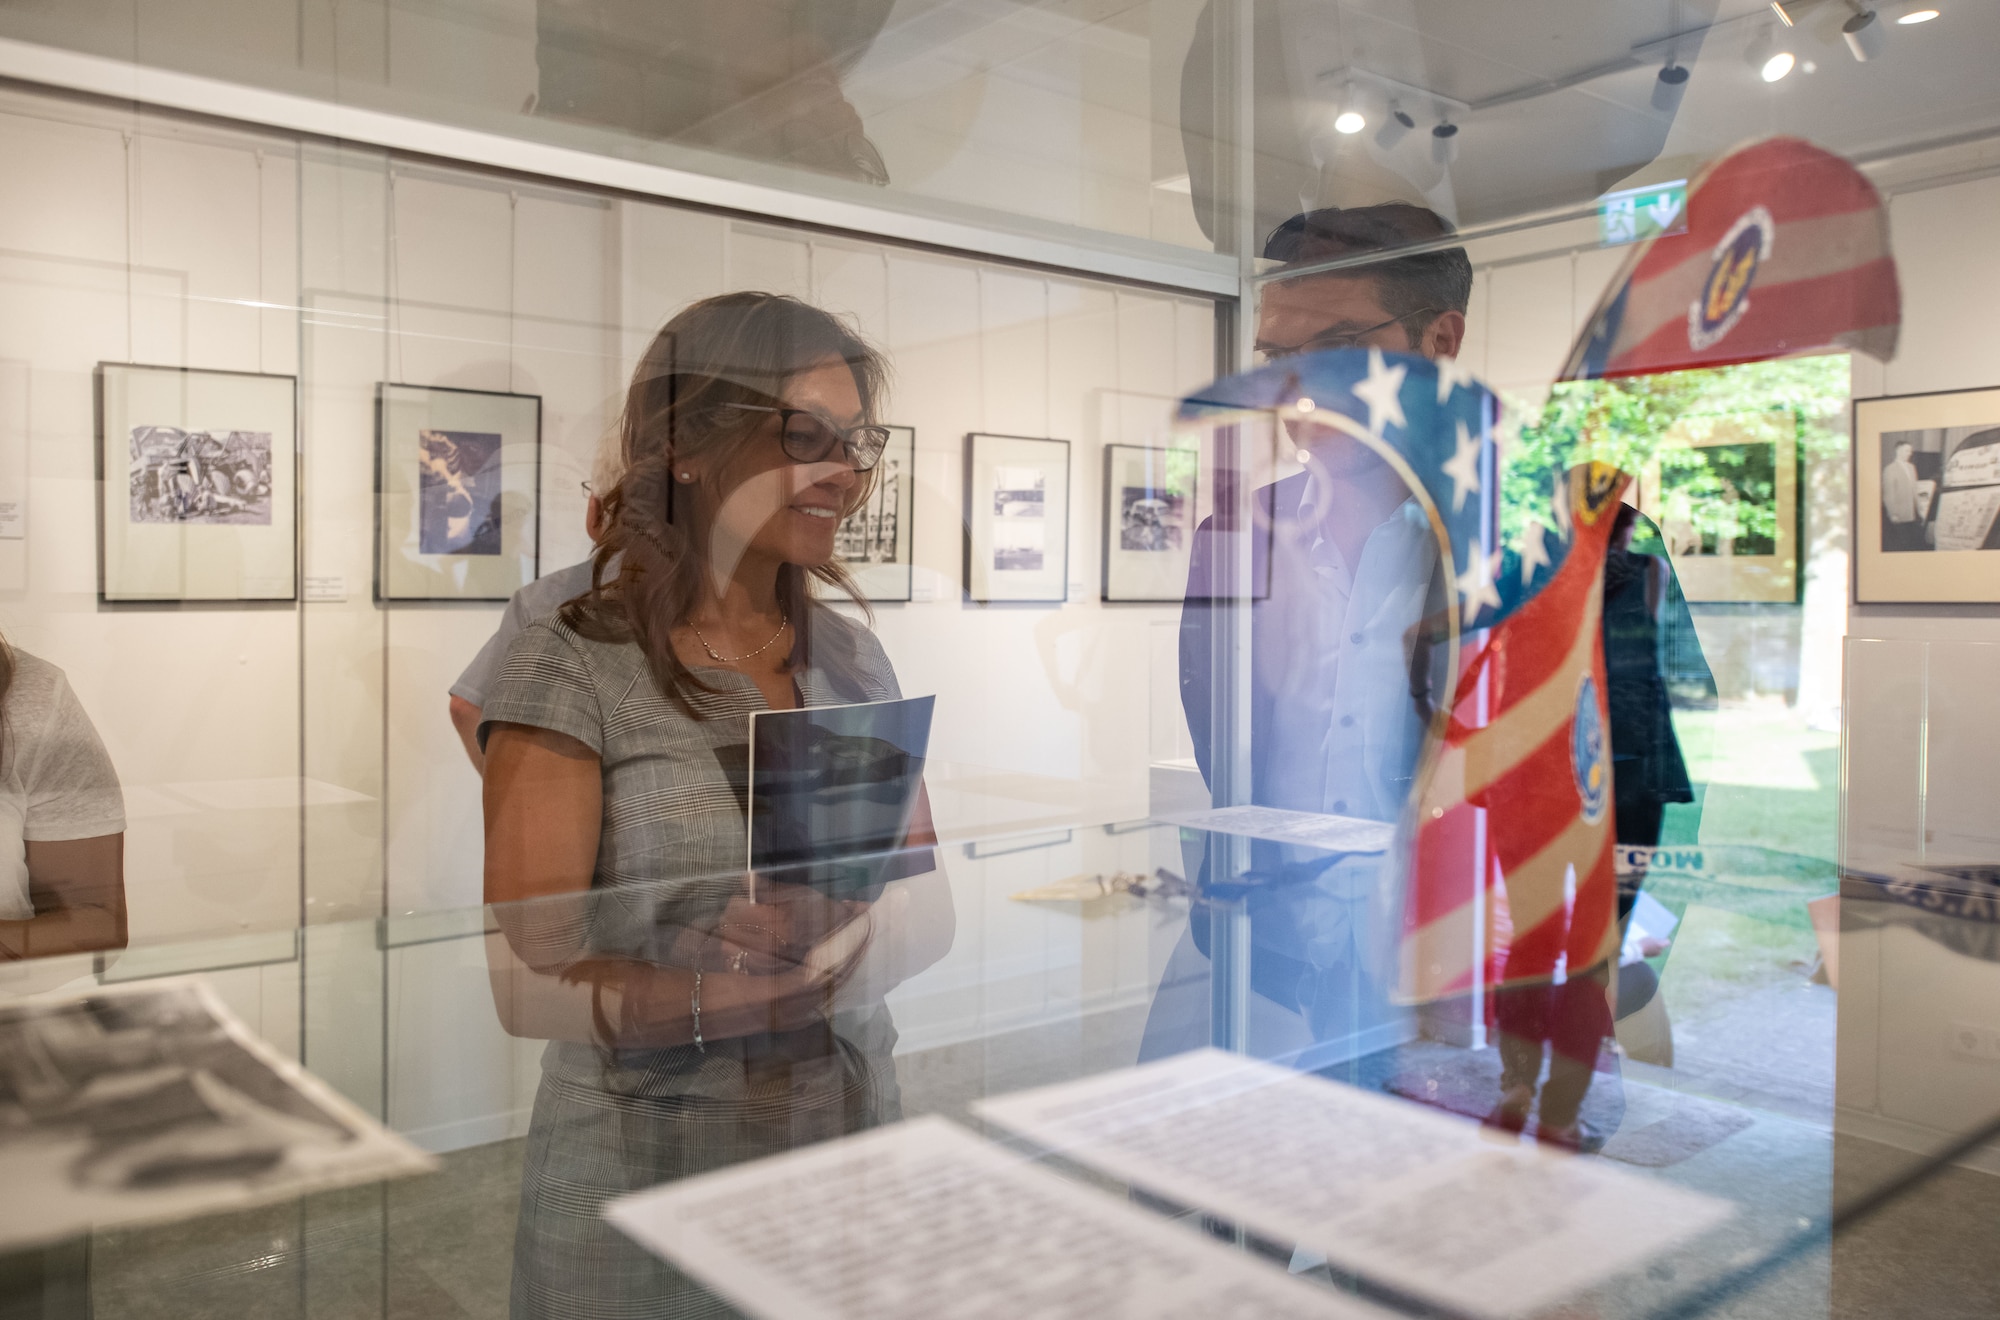 Raquel Fischer, 86th Airlift Wing vice director, tours the 70 years of Ramstein Air Base Exhibit at the Docu Center Ramstein, Germany, June 15, 2022.